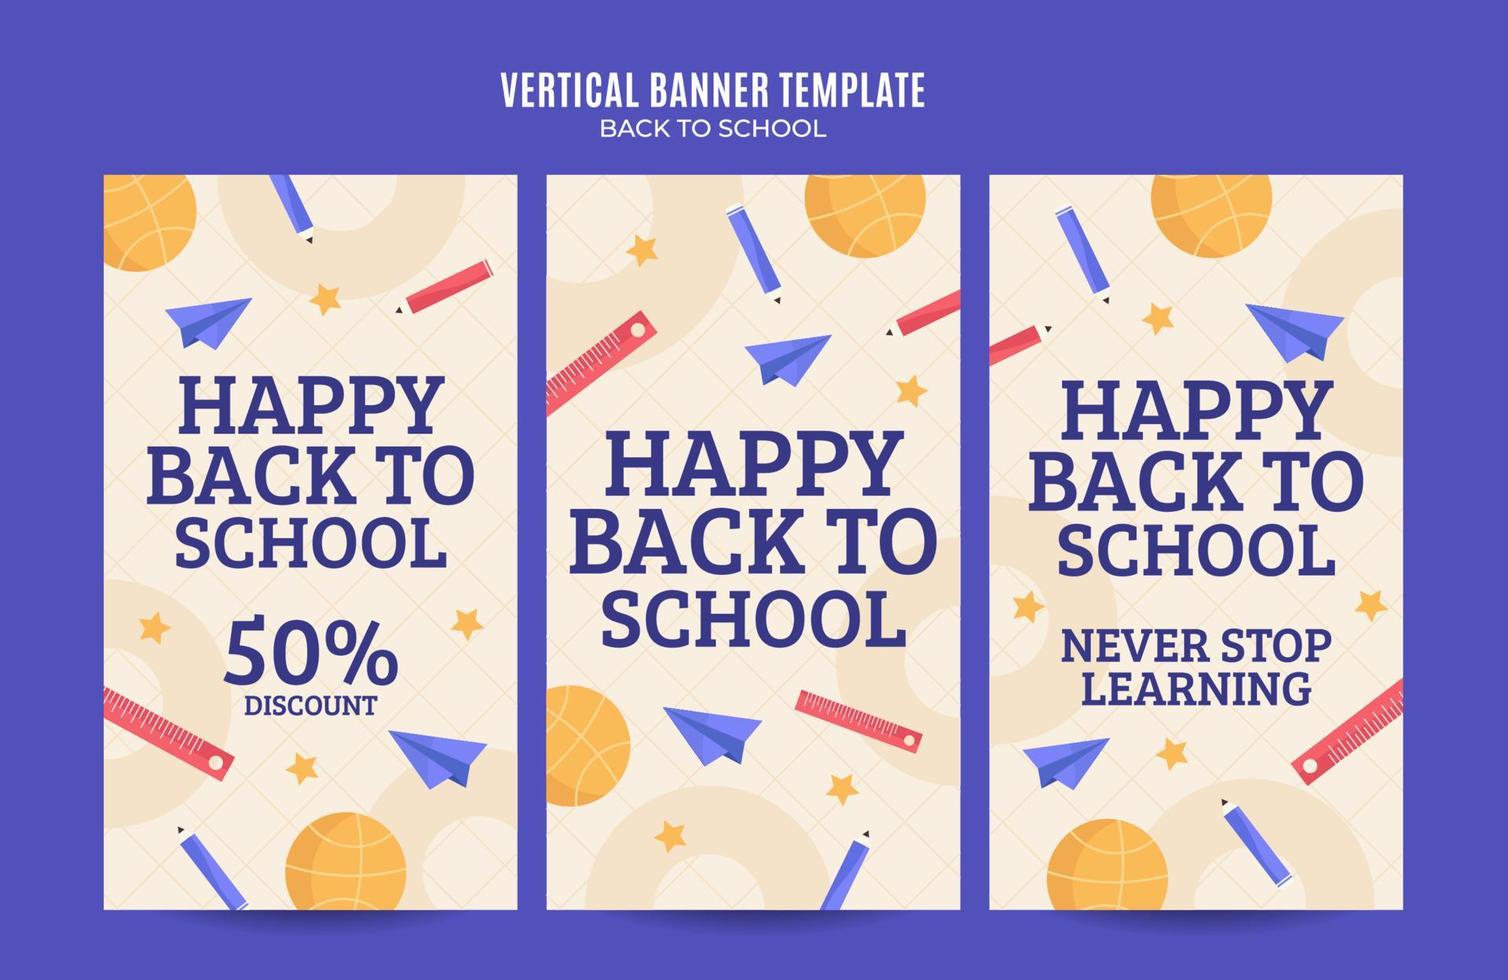 Back to School Web Banner for Social Media Vertical Poster, banner, space area and background vector